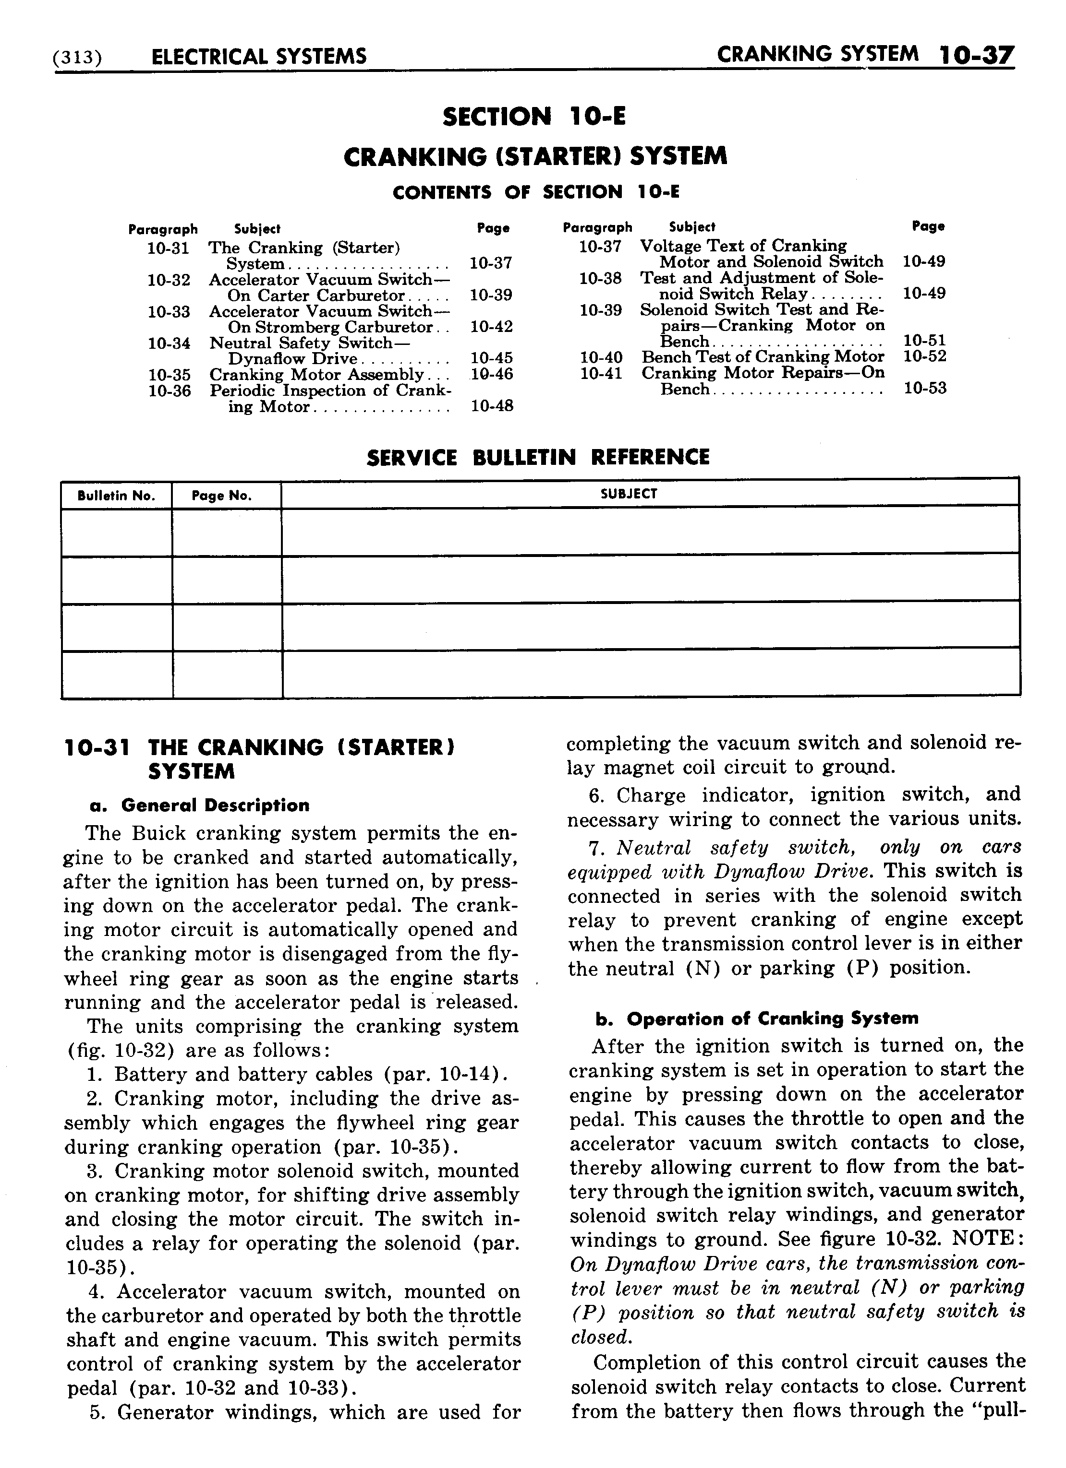 n_11 1948 Buick Shop Manual - Electrical Systems-037-037.jpg